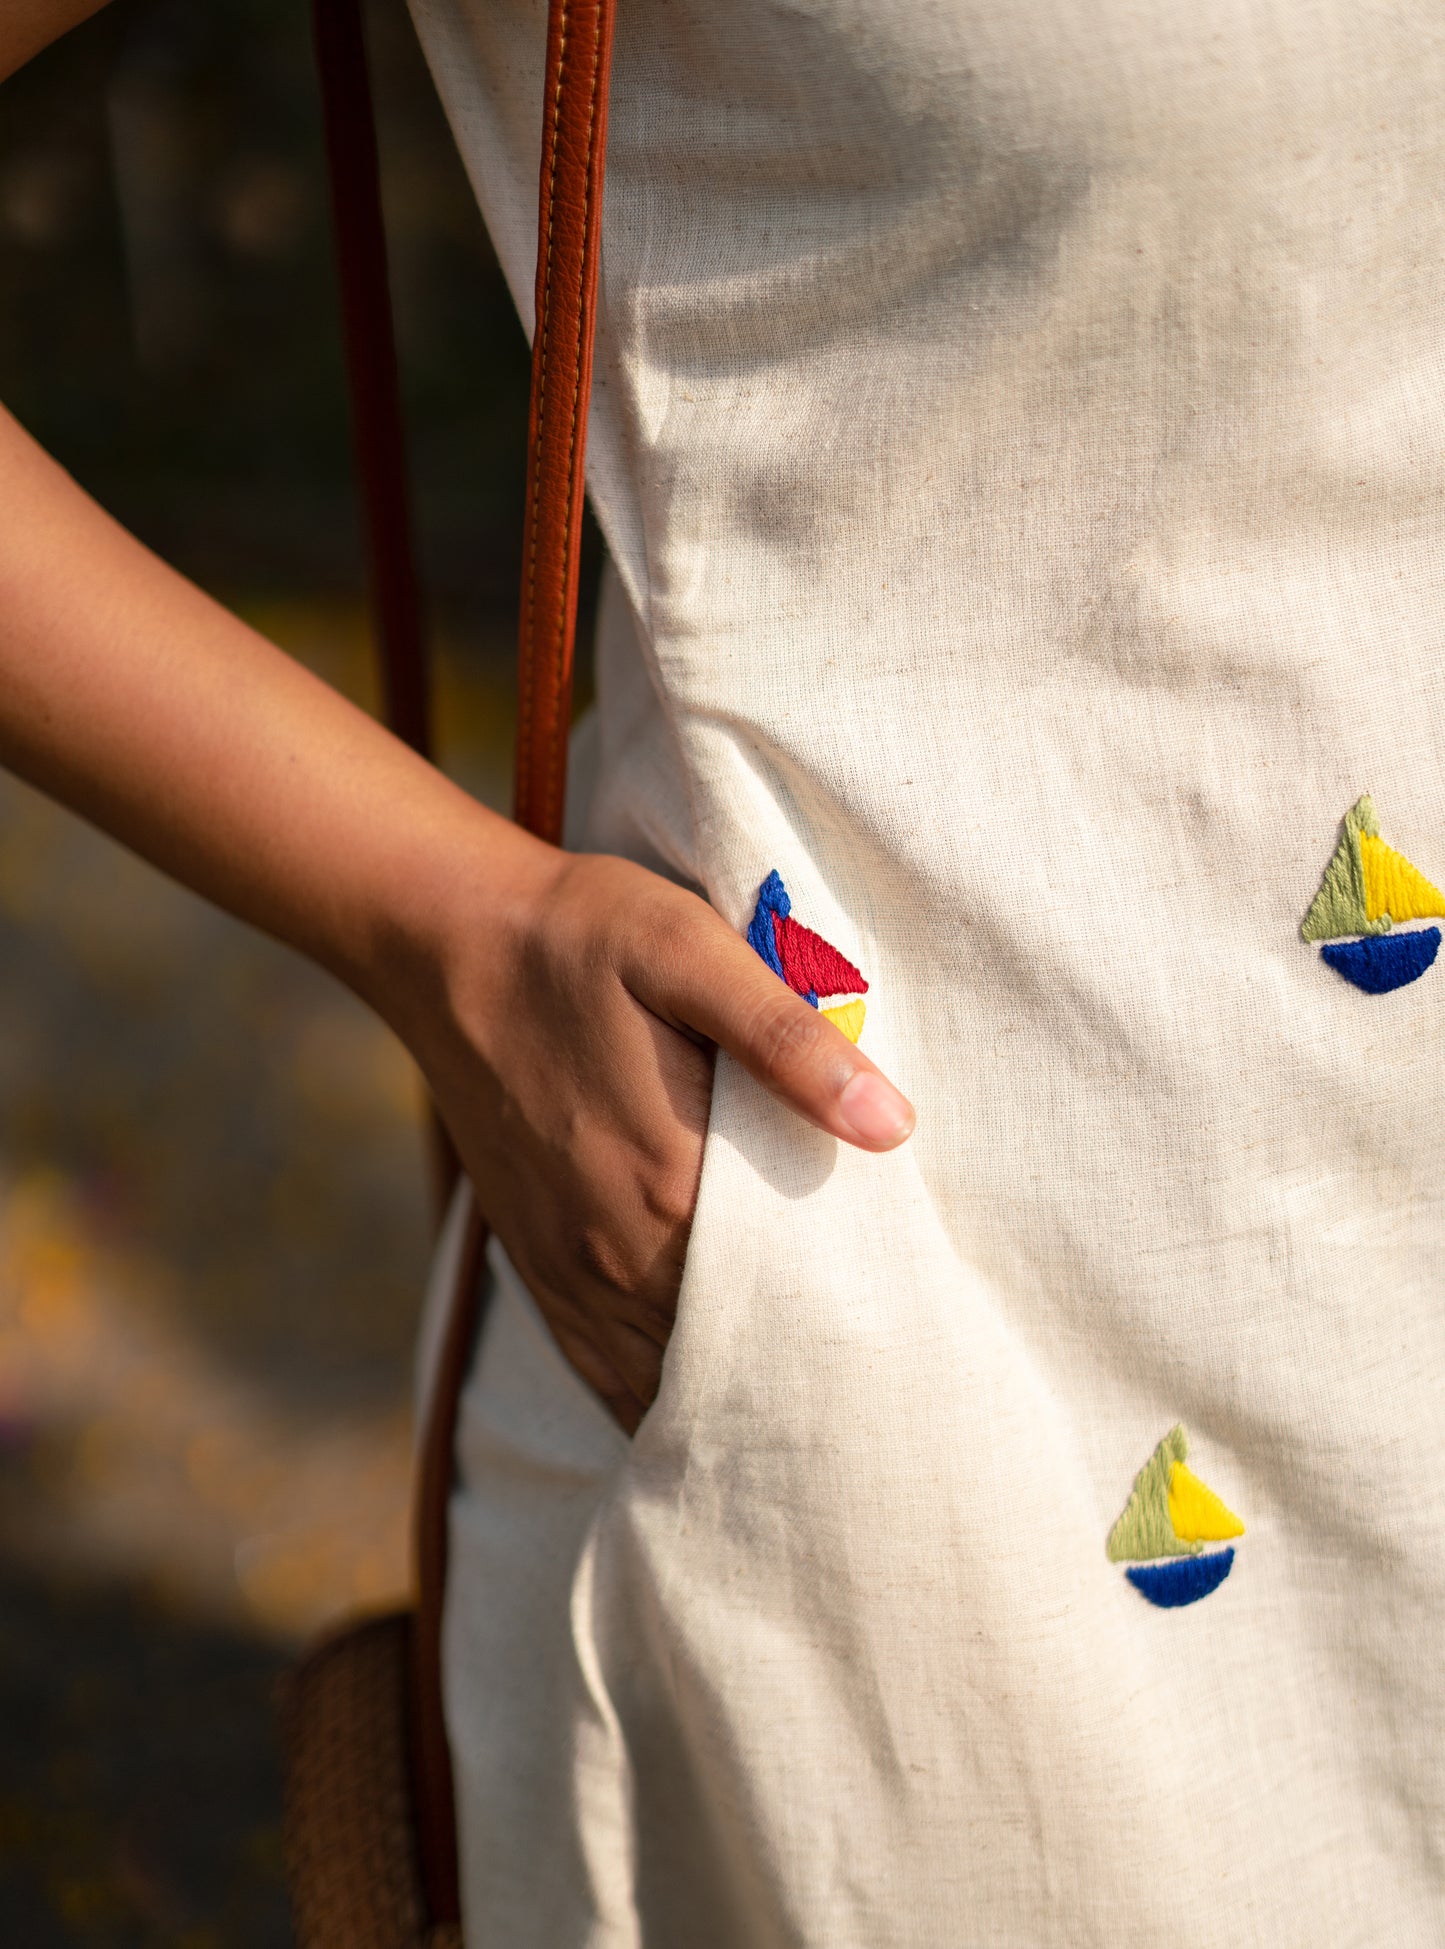 White Boat Hand Embroidered Cotton Dress